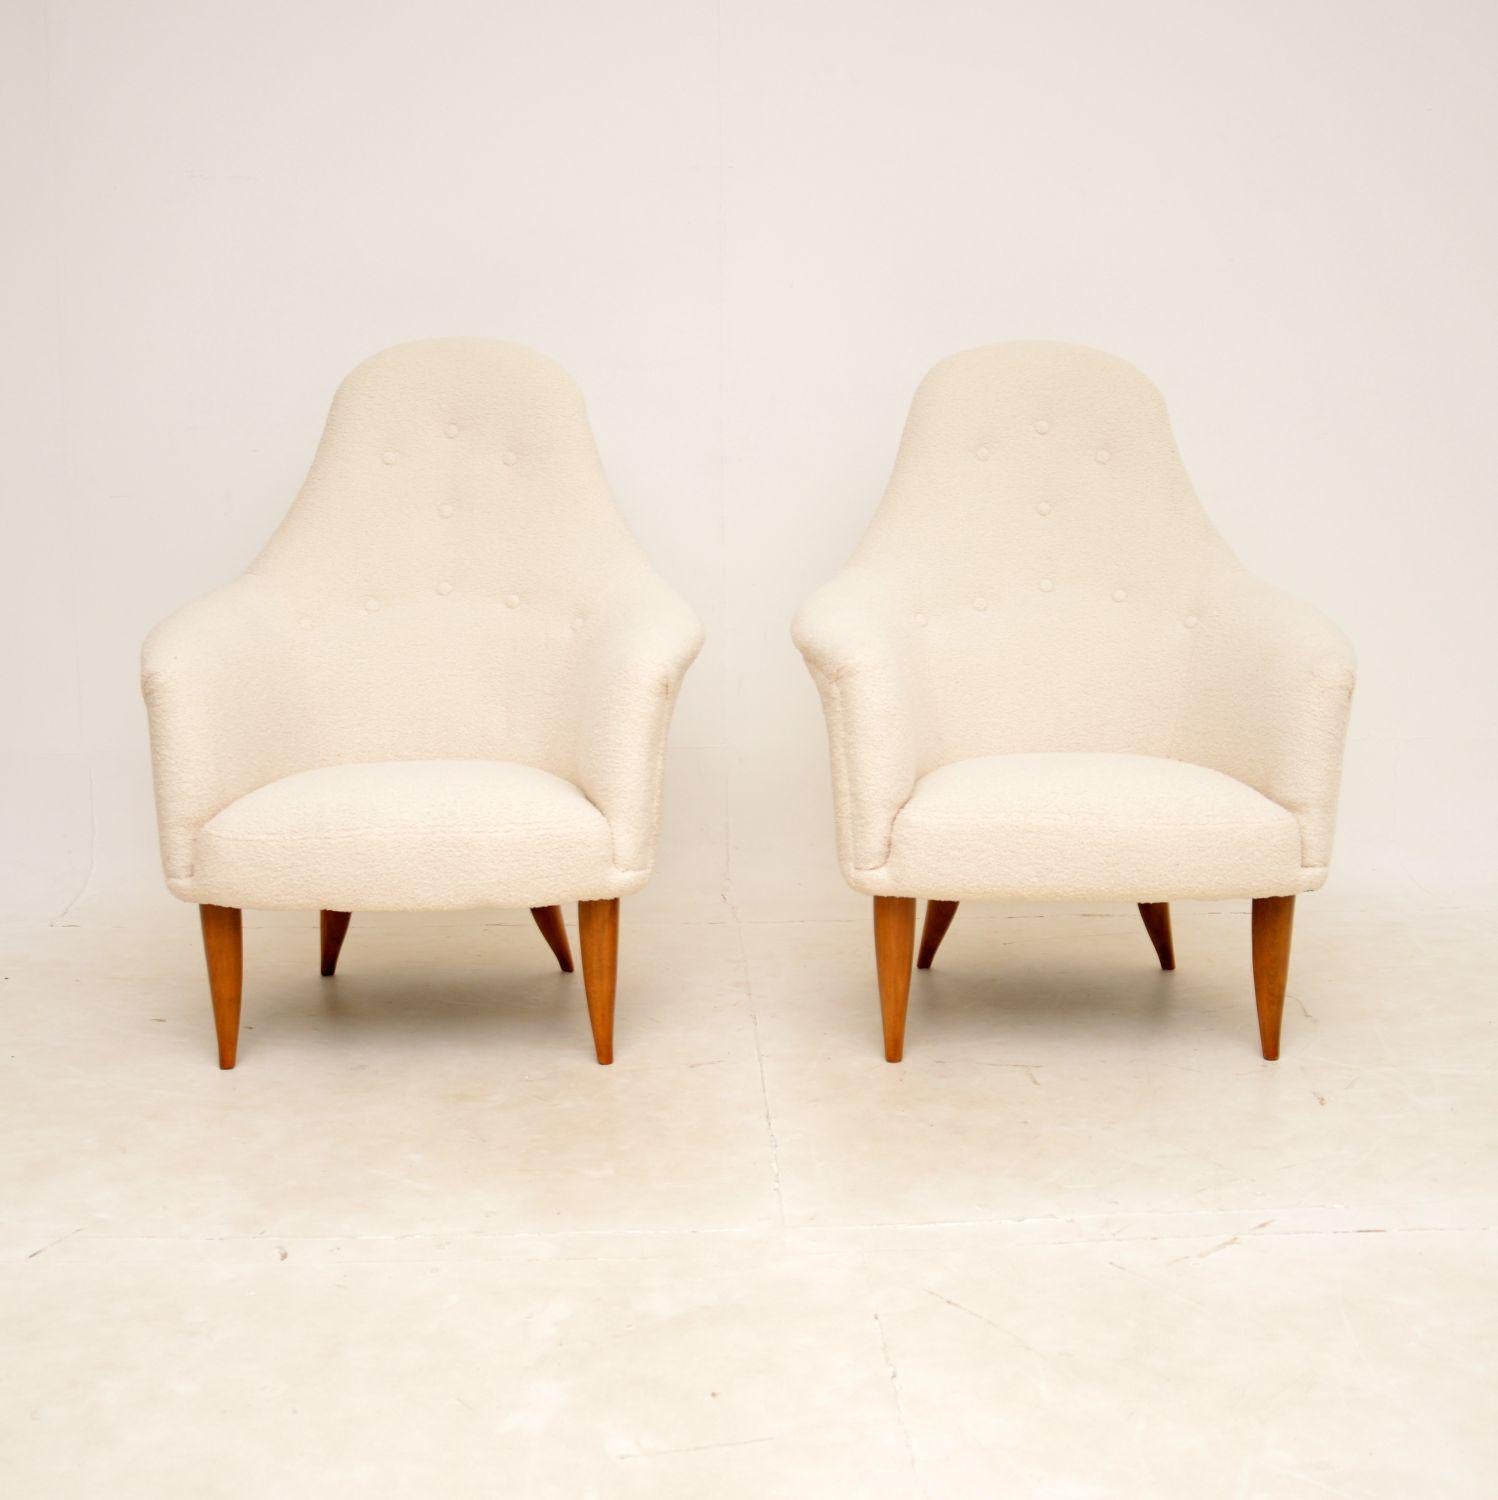 An absolutely stunning and very rare pair of vintage Swedish armchairs by Kerstin Horlin Holmquist. This model is called the ‘Adam’ chair, designed by Kerstin Horlin Holmquist for Nordiska Kompaniet. They were recently imported from Sweden, they